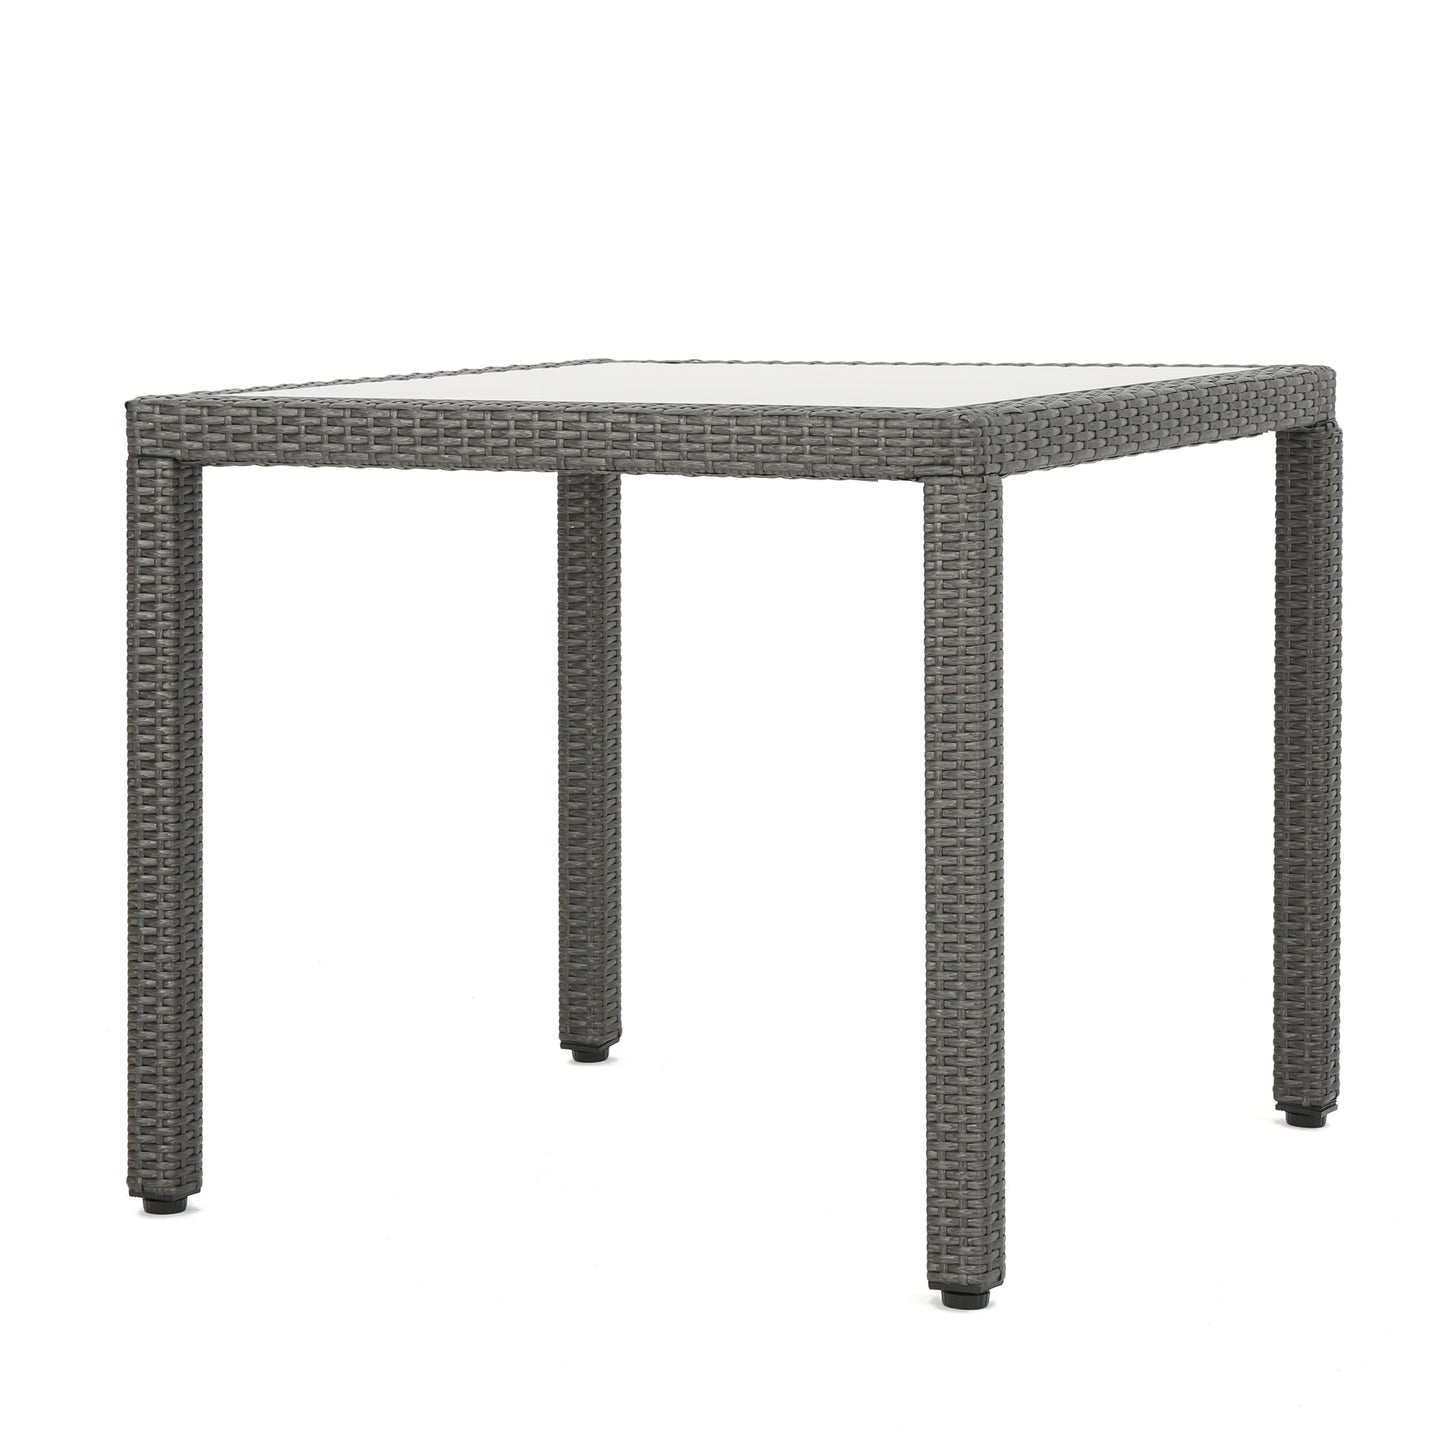 San Tropez Outdoor Wicker Dining Table with Glass Top